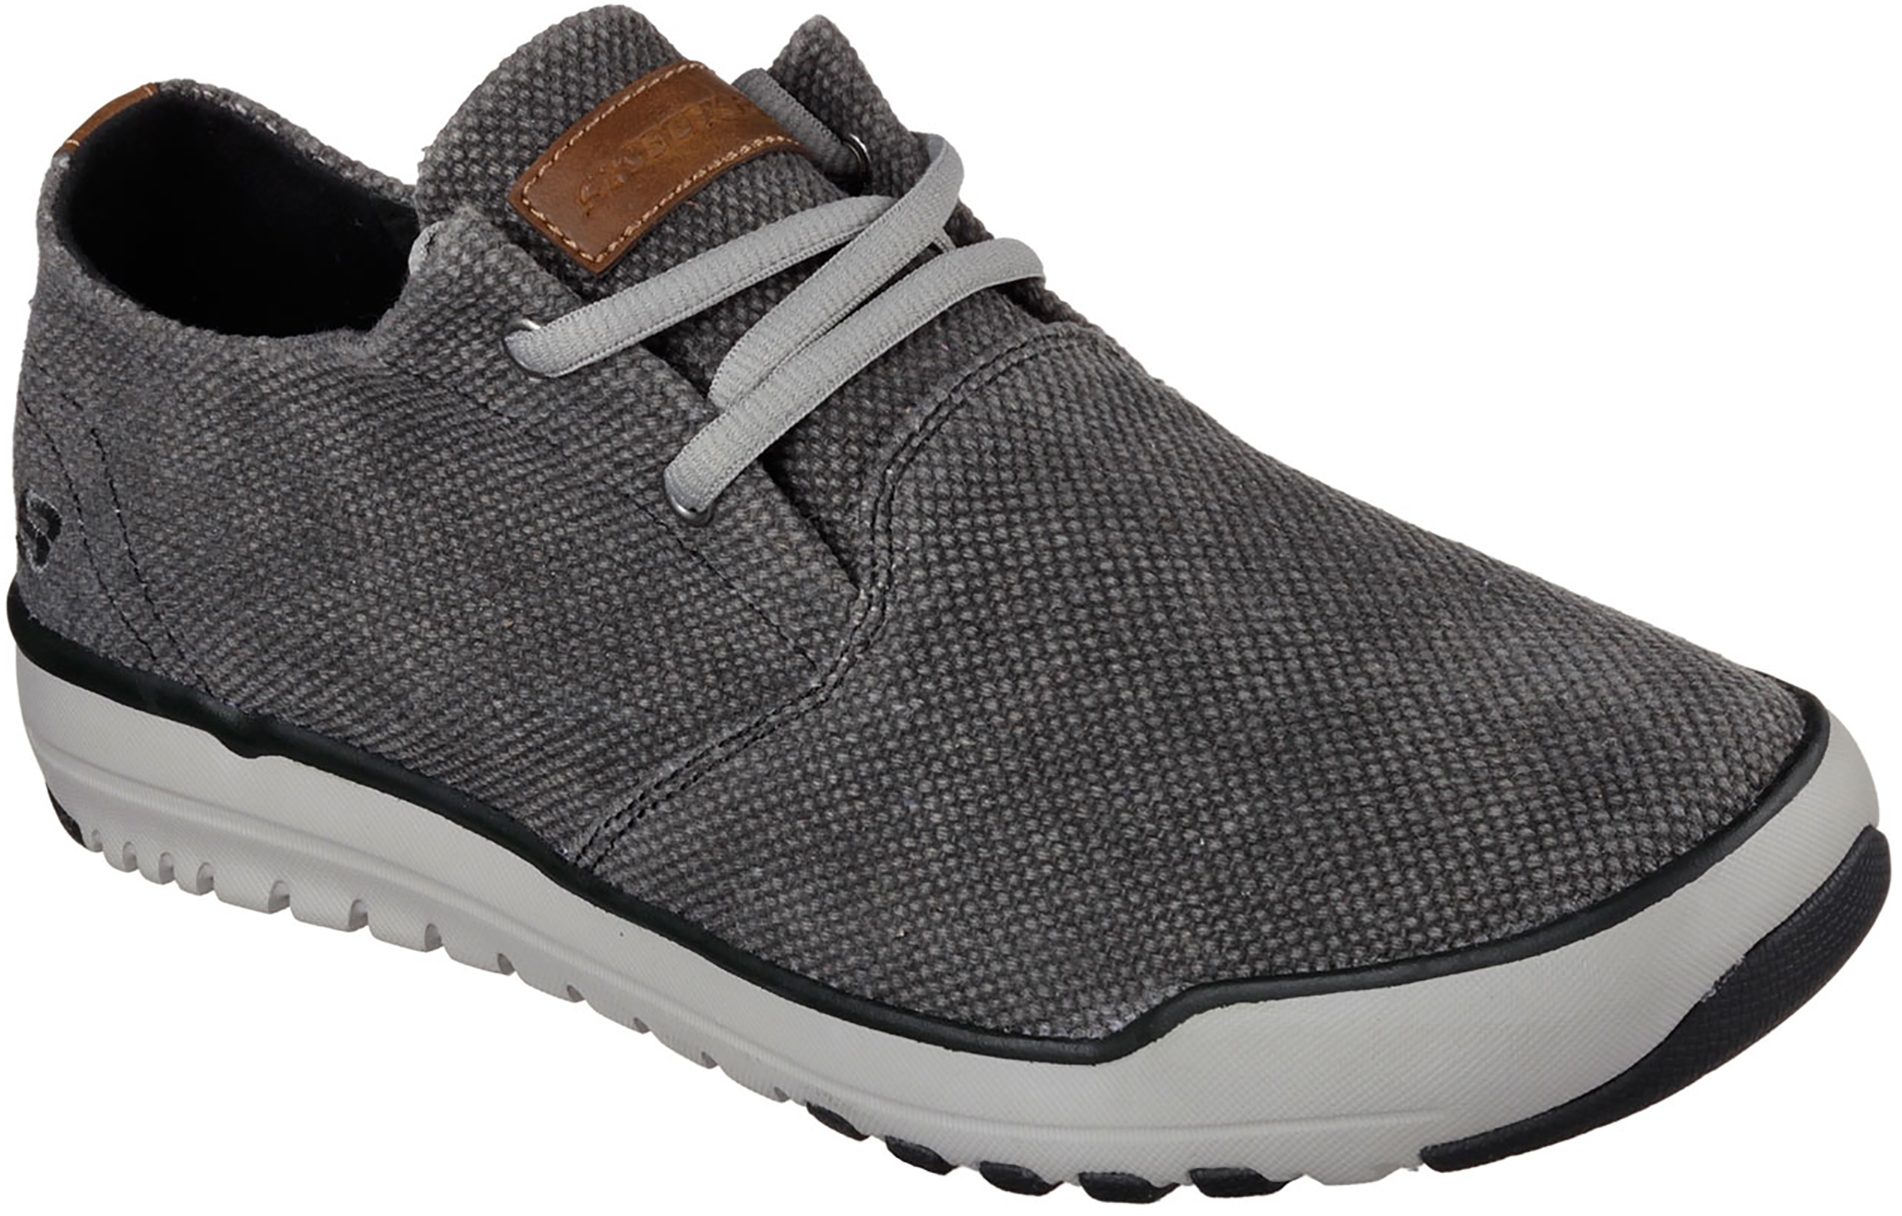 Skechers Oldis - Stound Black / Grey 64622 BKGY - Trainers - Humphries ...